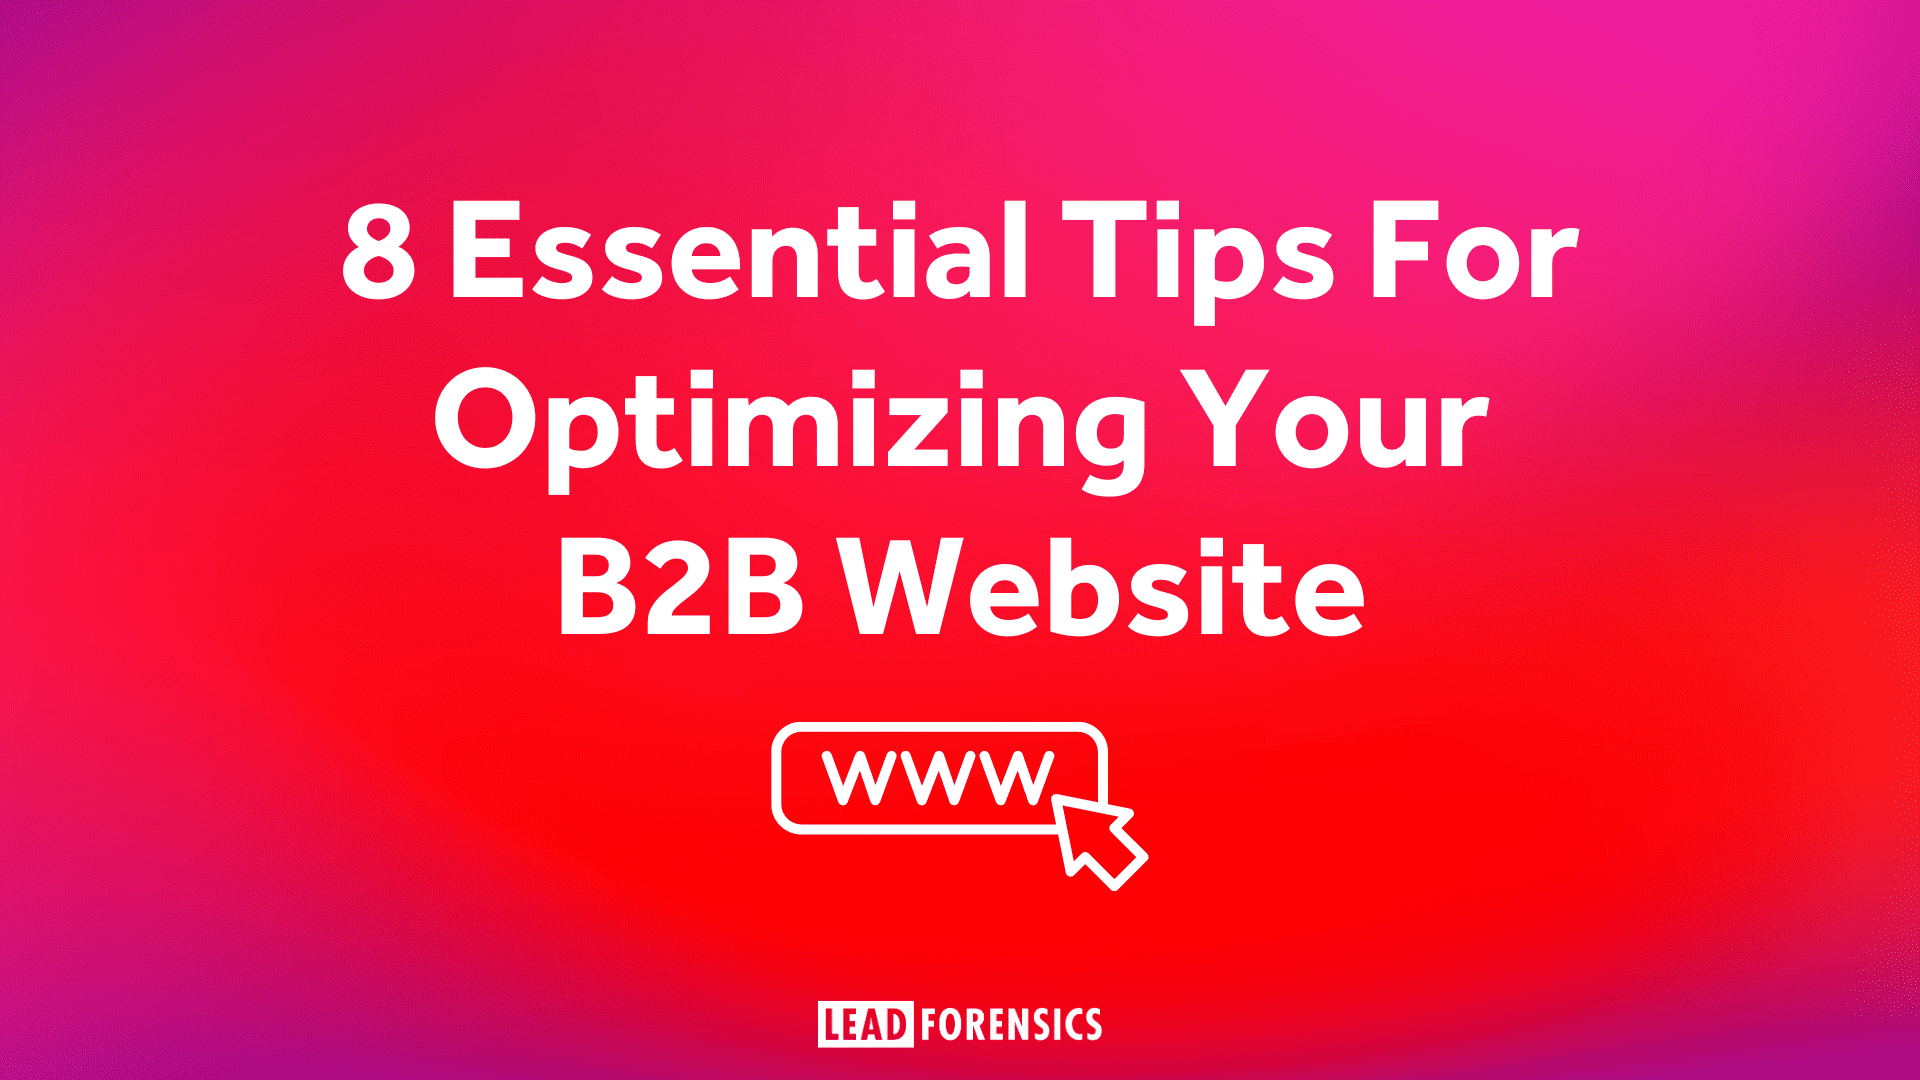 8 Essential Tips For Optimizing Your B2B Website